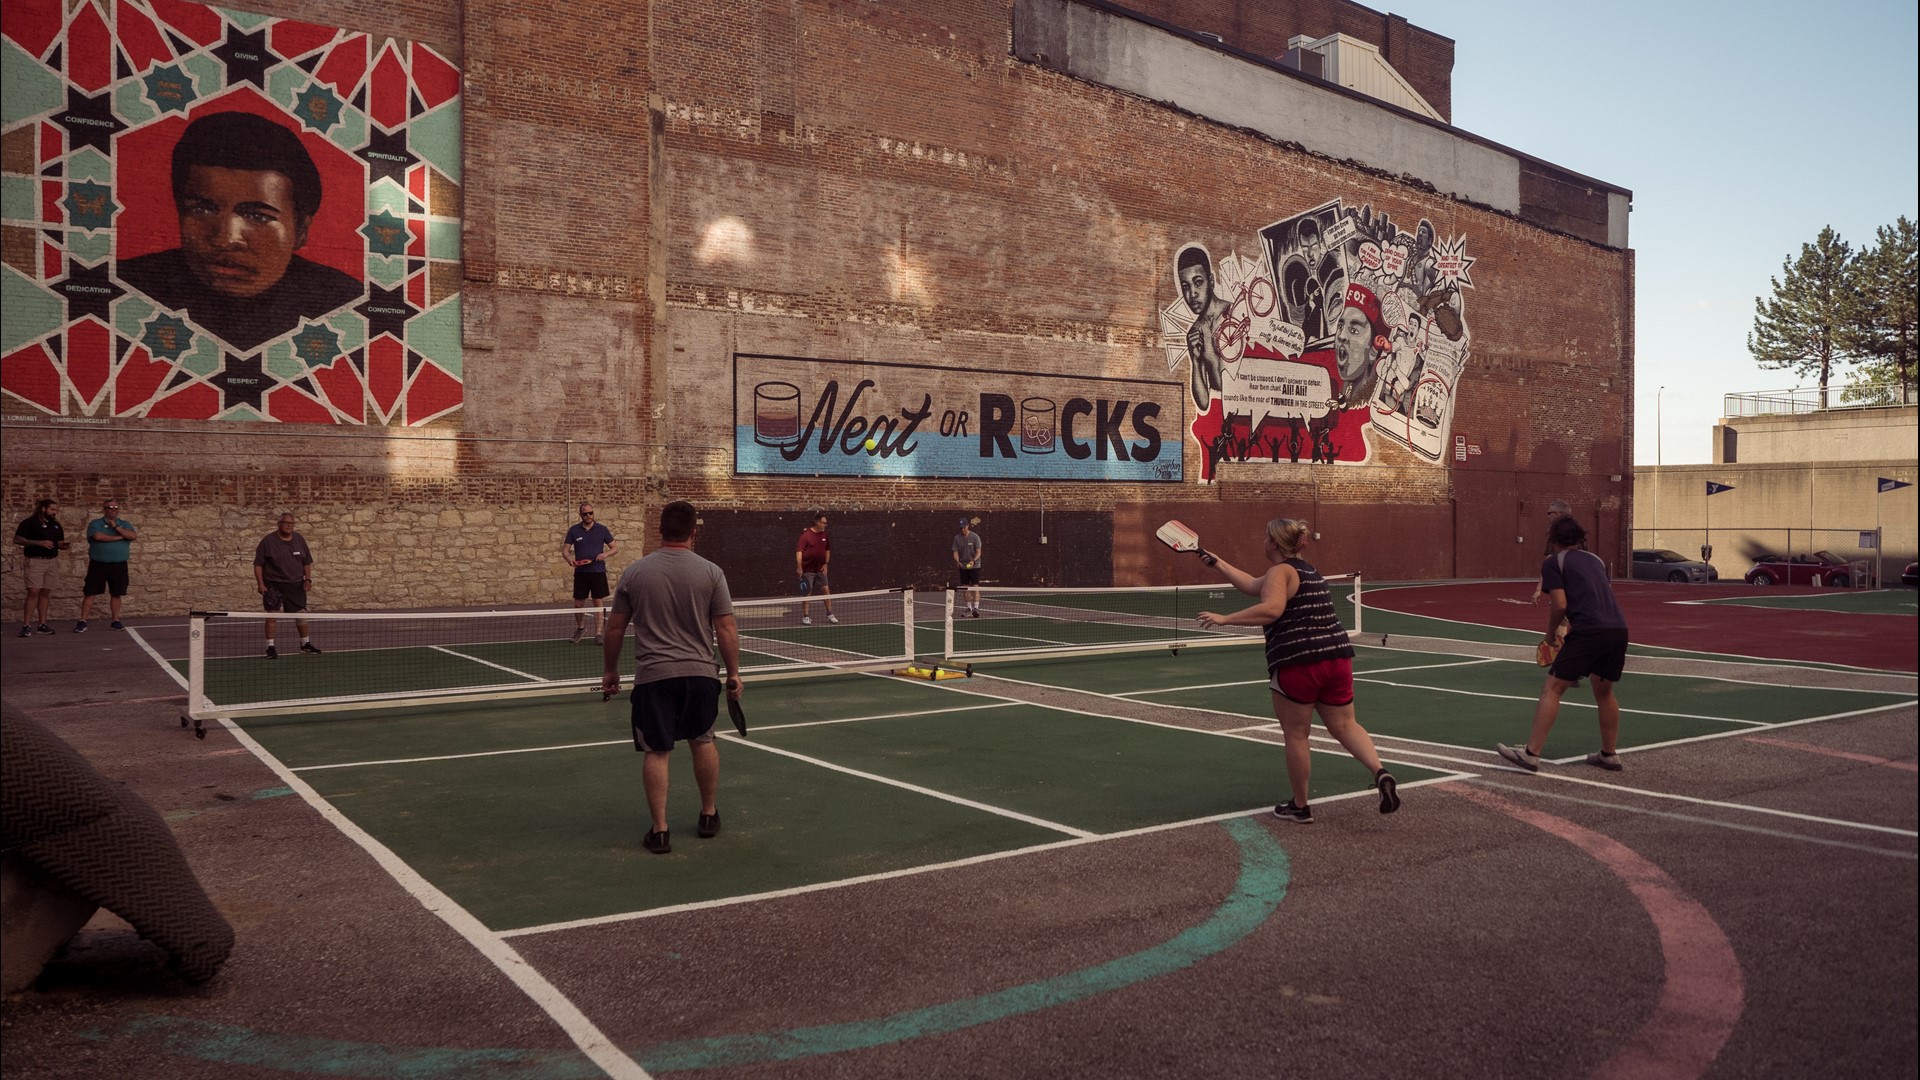 In the past, the lot has been used for temporary or pop-up space; now it holds two regulation-size Pickleball courts and a Wiffle ball field.